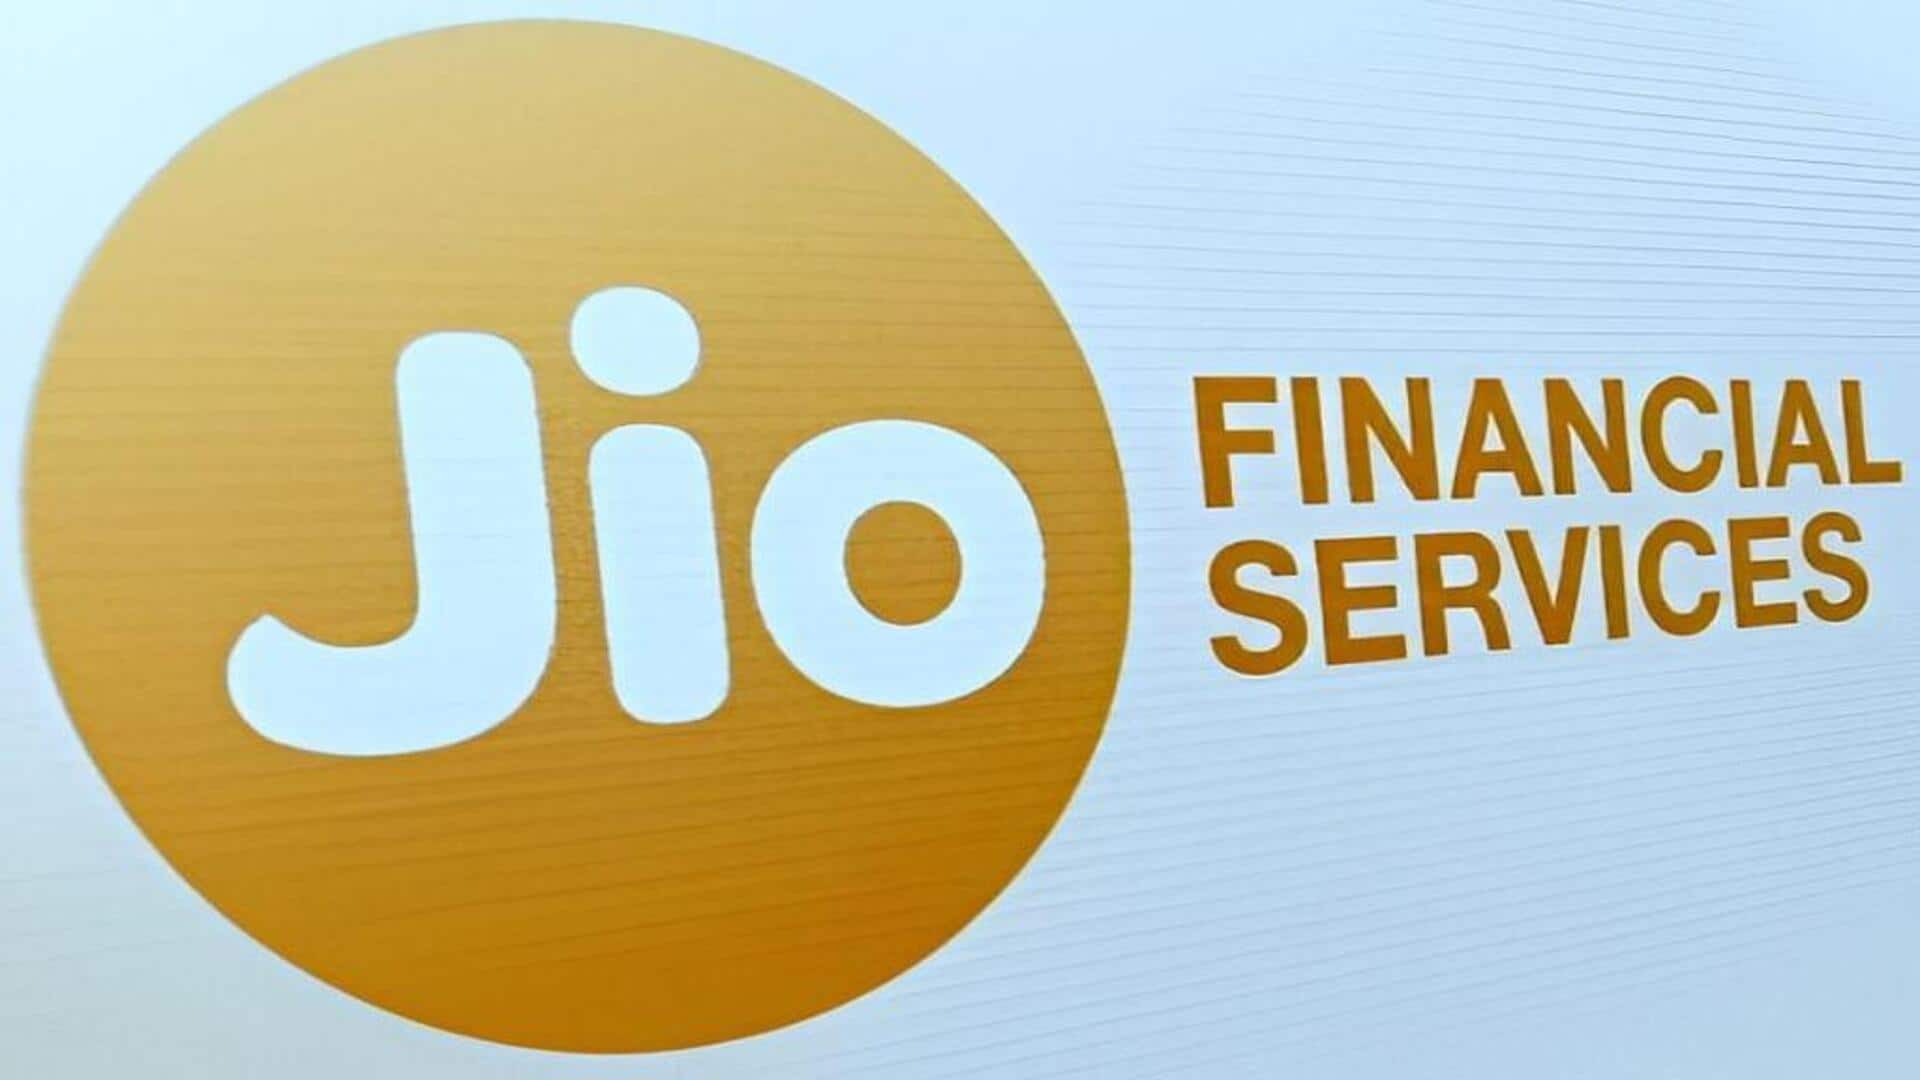 Jio Financial Services faces exclusion from NSE indices tomorrow